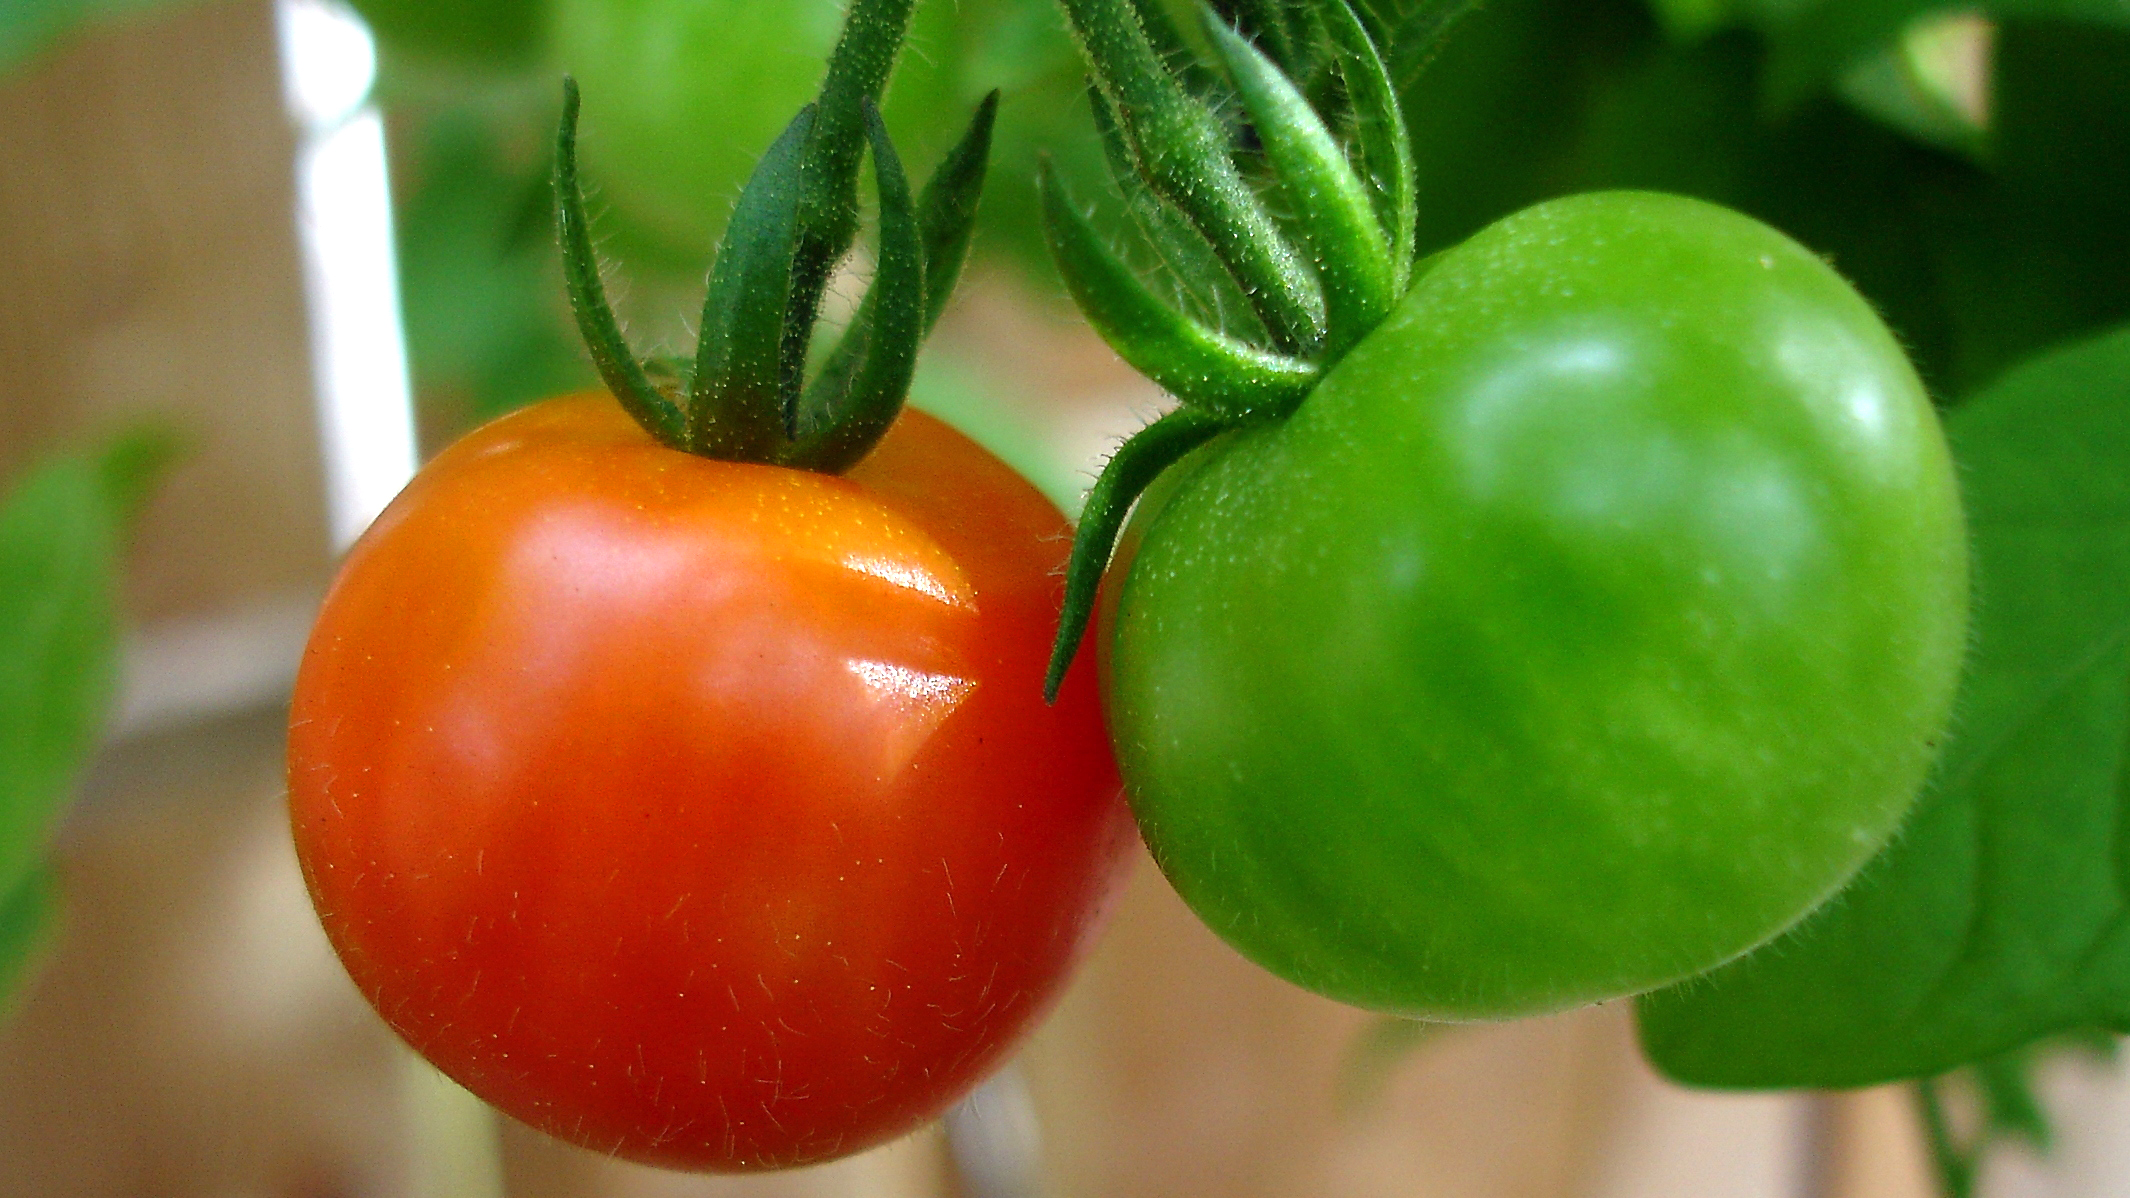 Cherry_tomatoes_red_and_green_2009_16x9.jpg